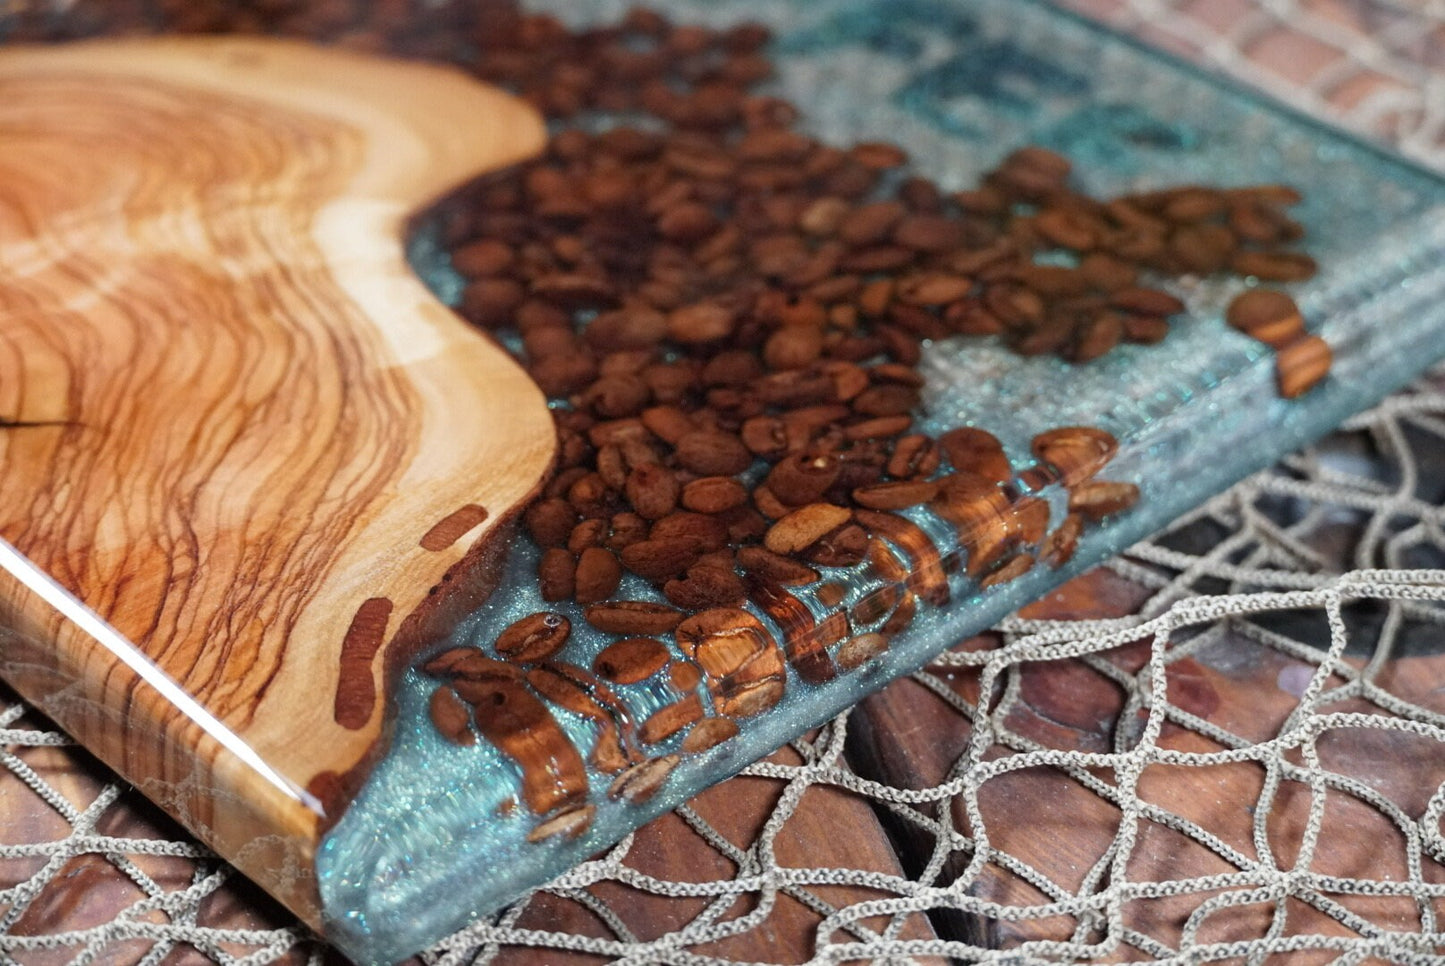 Coffee Bean and Olive wood Serving Tray, Charcuterie Board